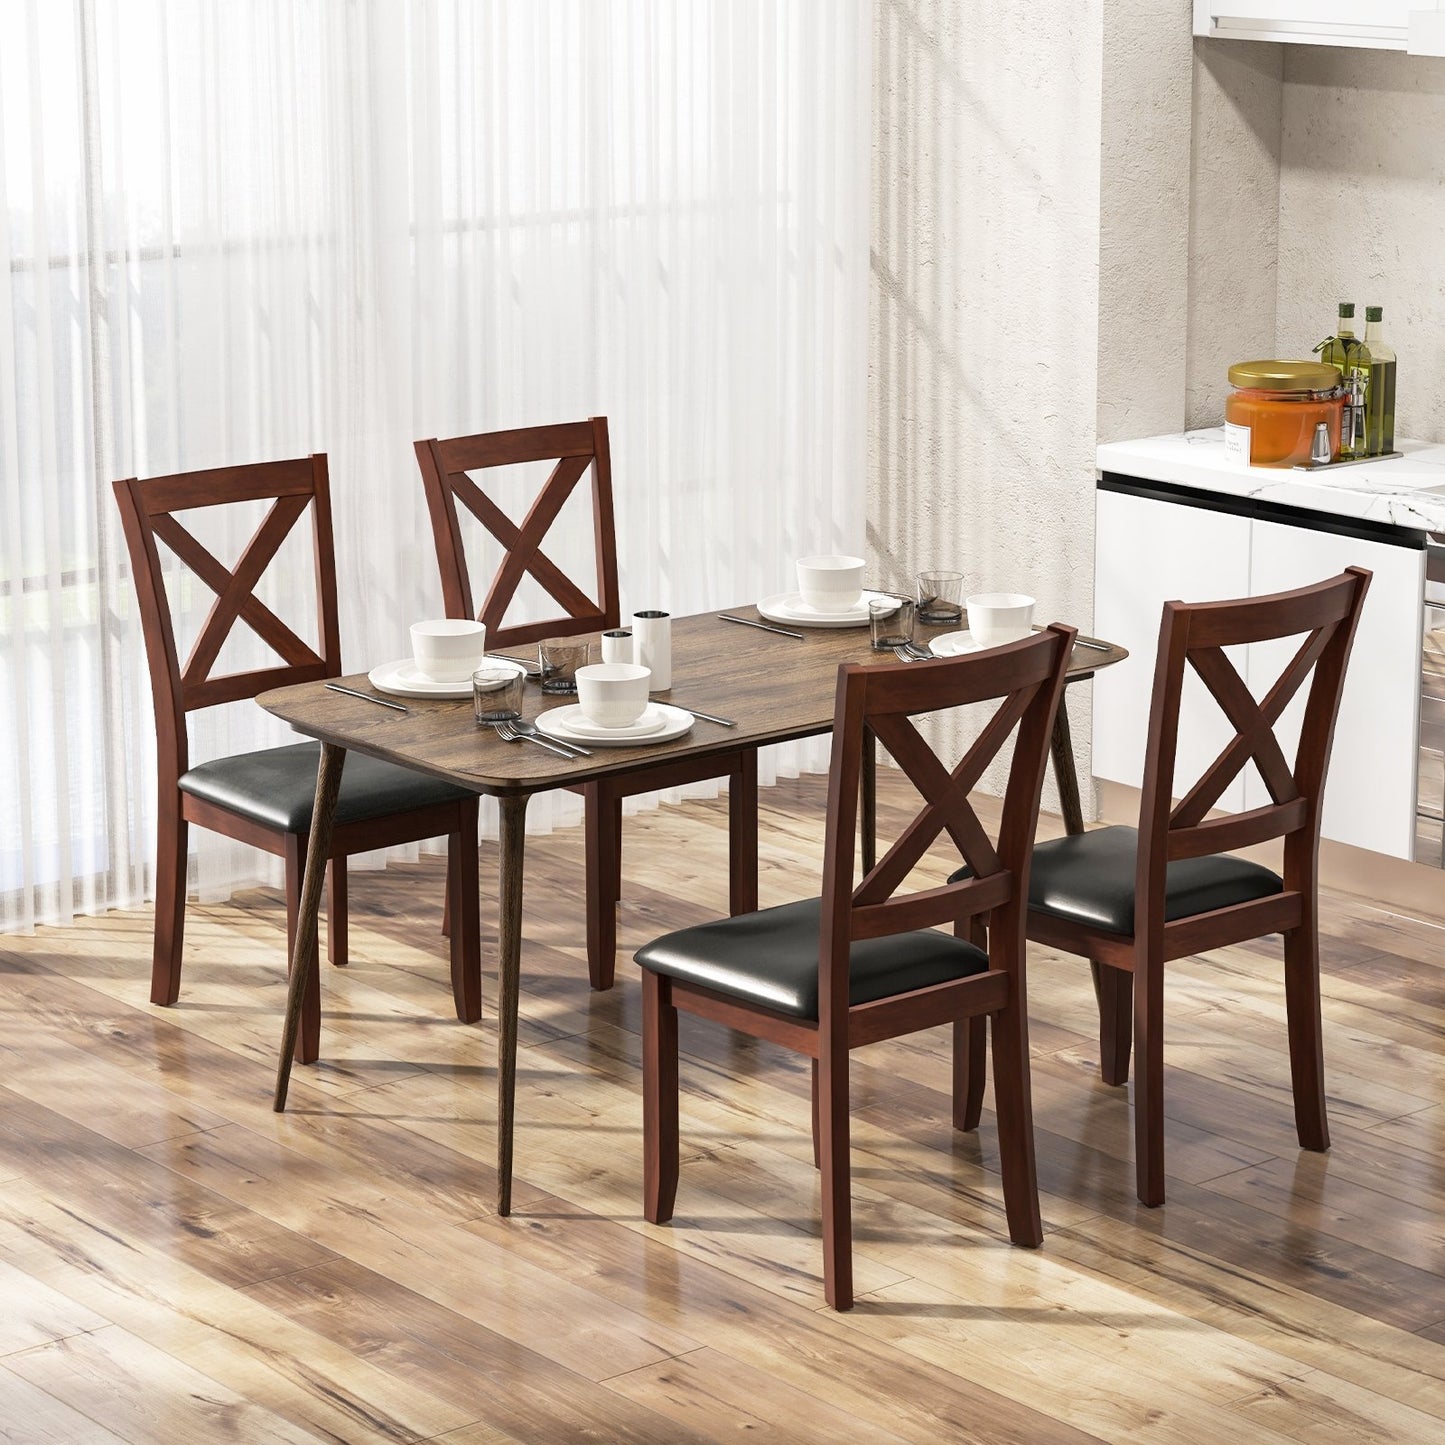 Set of 2 Wooden Kitchen Dining Chair with Padded Seat and Rubber Wood Legs, Black at Gallery Canada